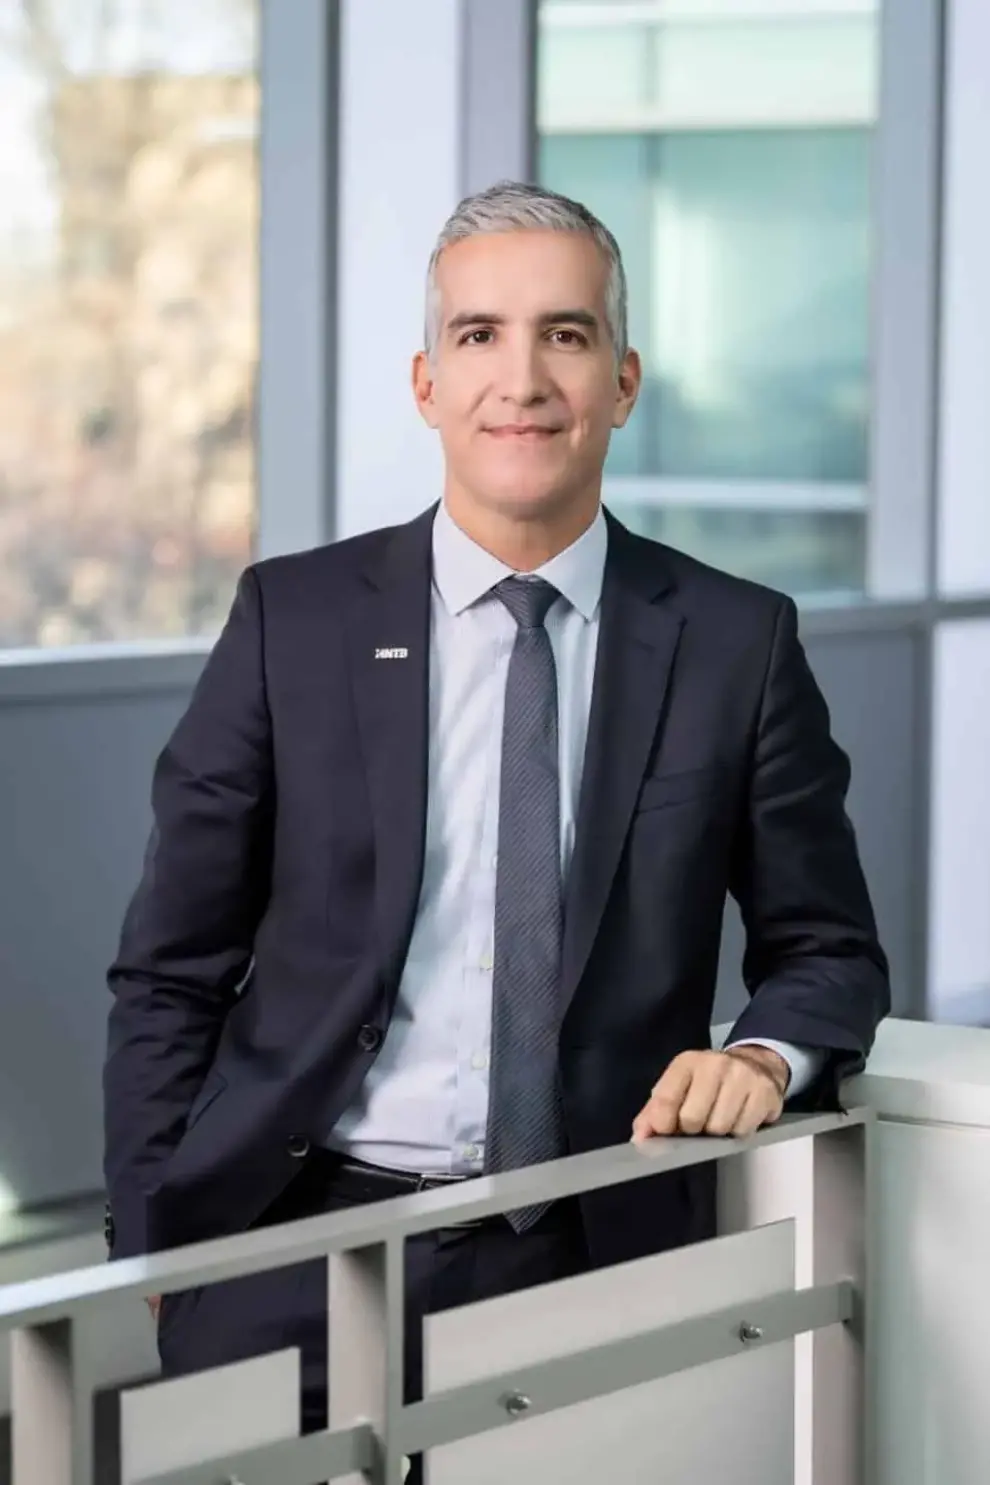 David Lopez Tome named HNTB architecture national practice leader